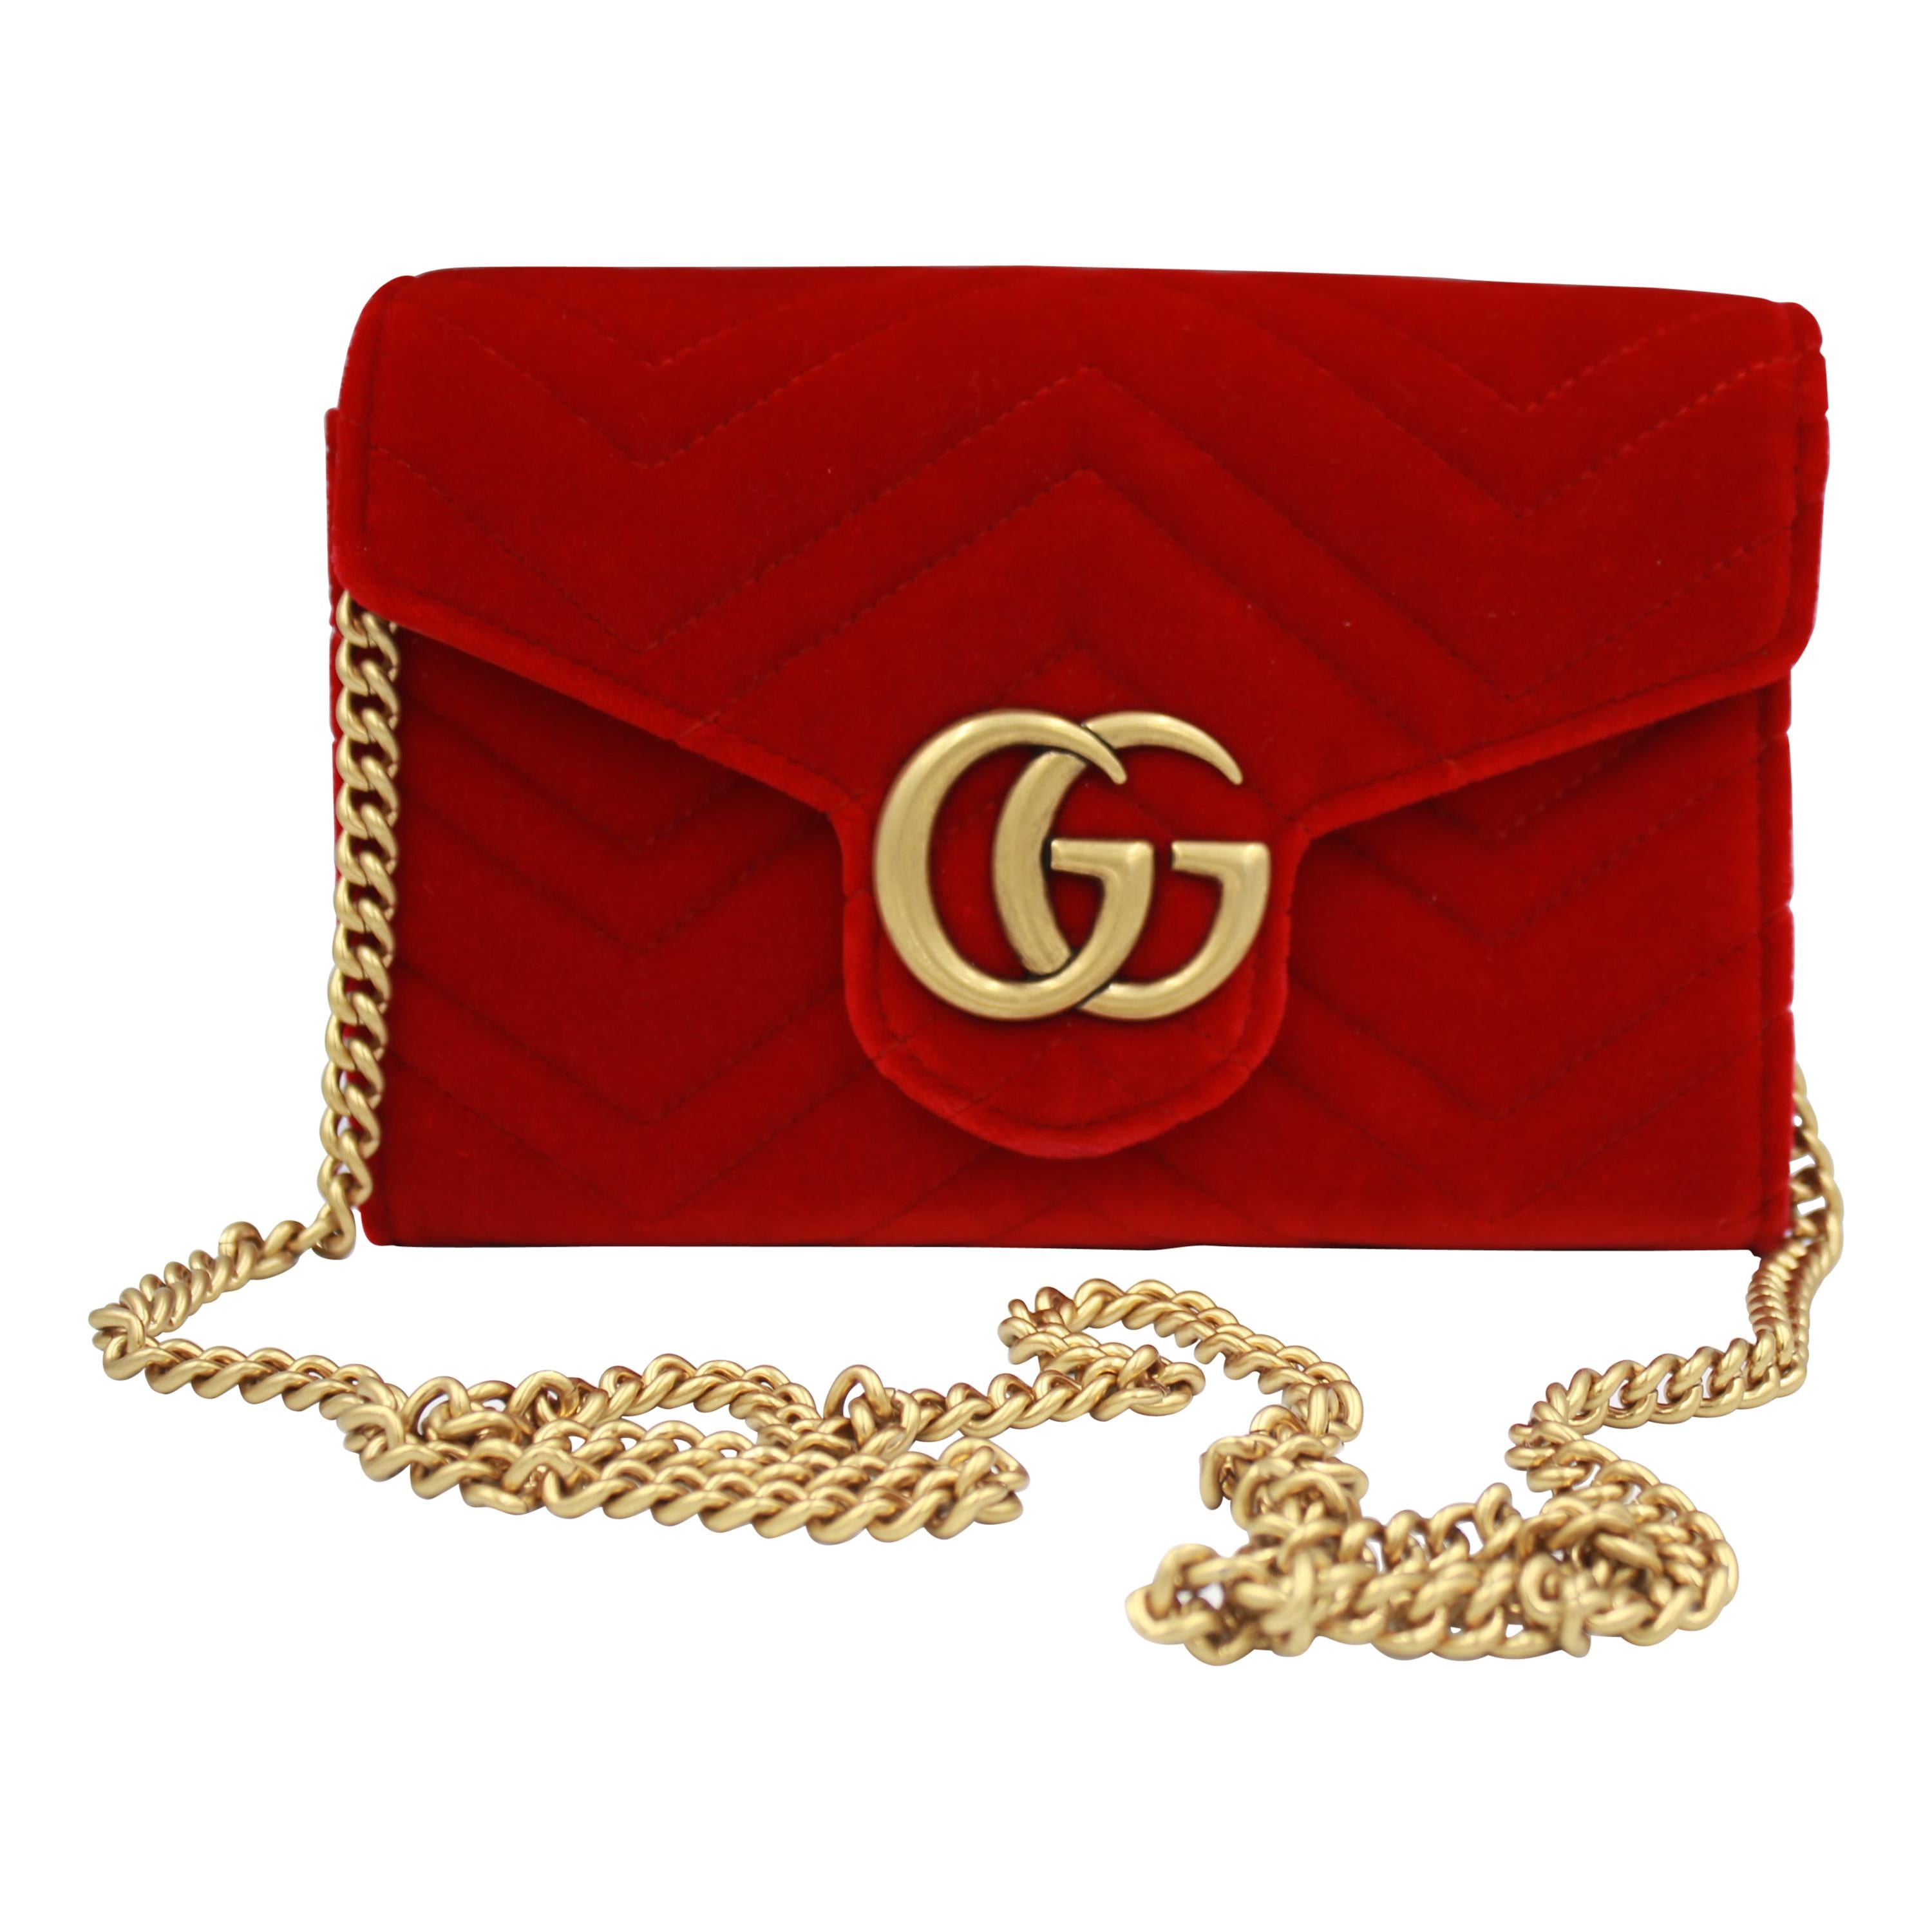 GUCCI OPHIDIA GG RED SHOULDER BAG  UNBOXING  REVIEW  WHAT FITS INSIDE   YouTube